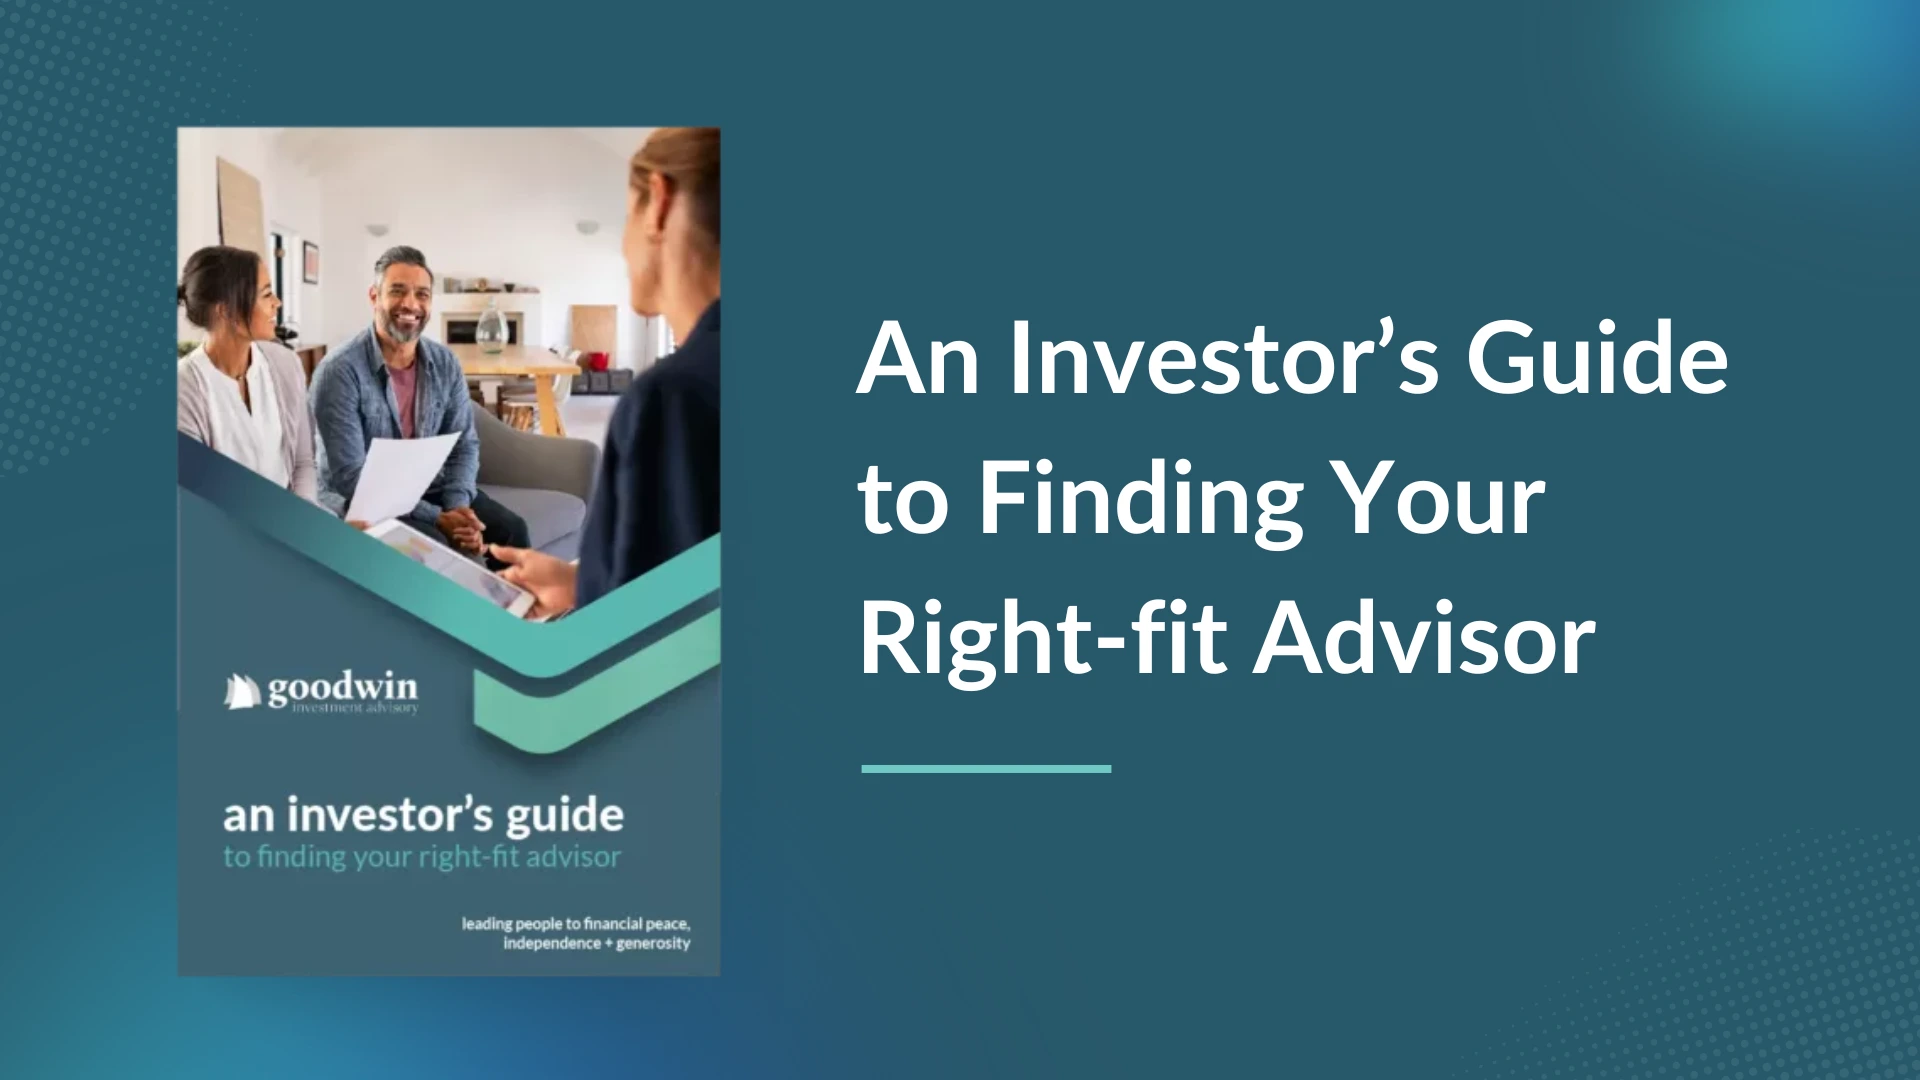 An Investor’s Guide to Finding Your Right-fit Advisor